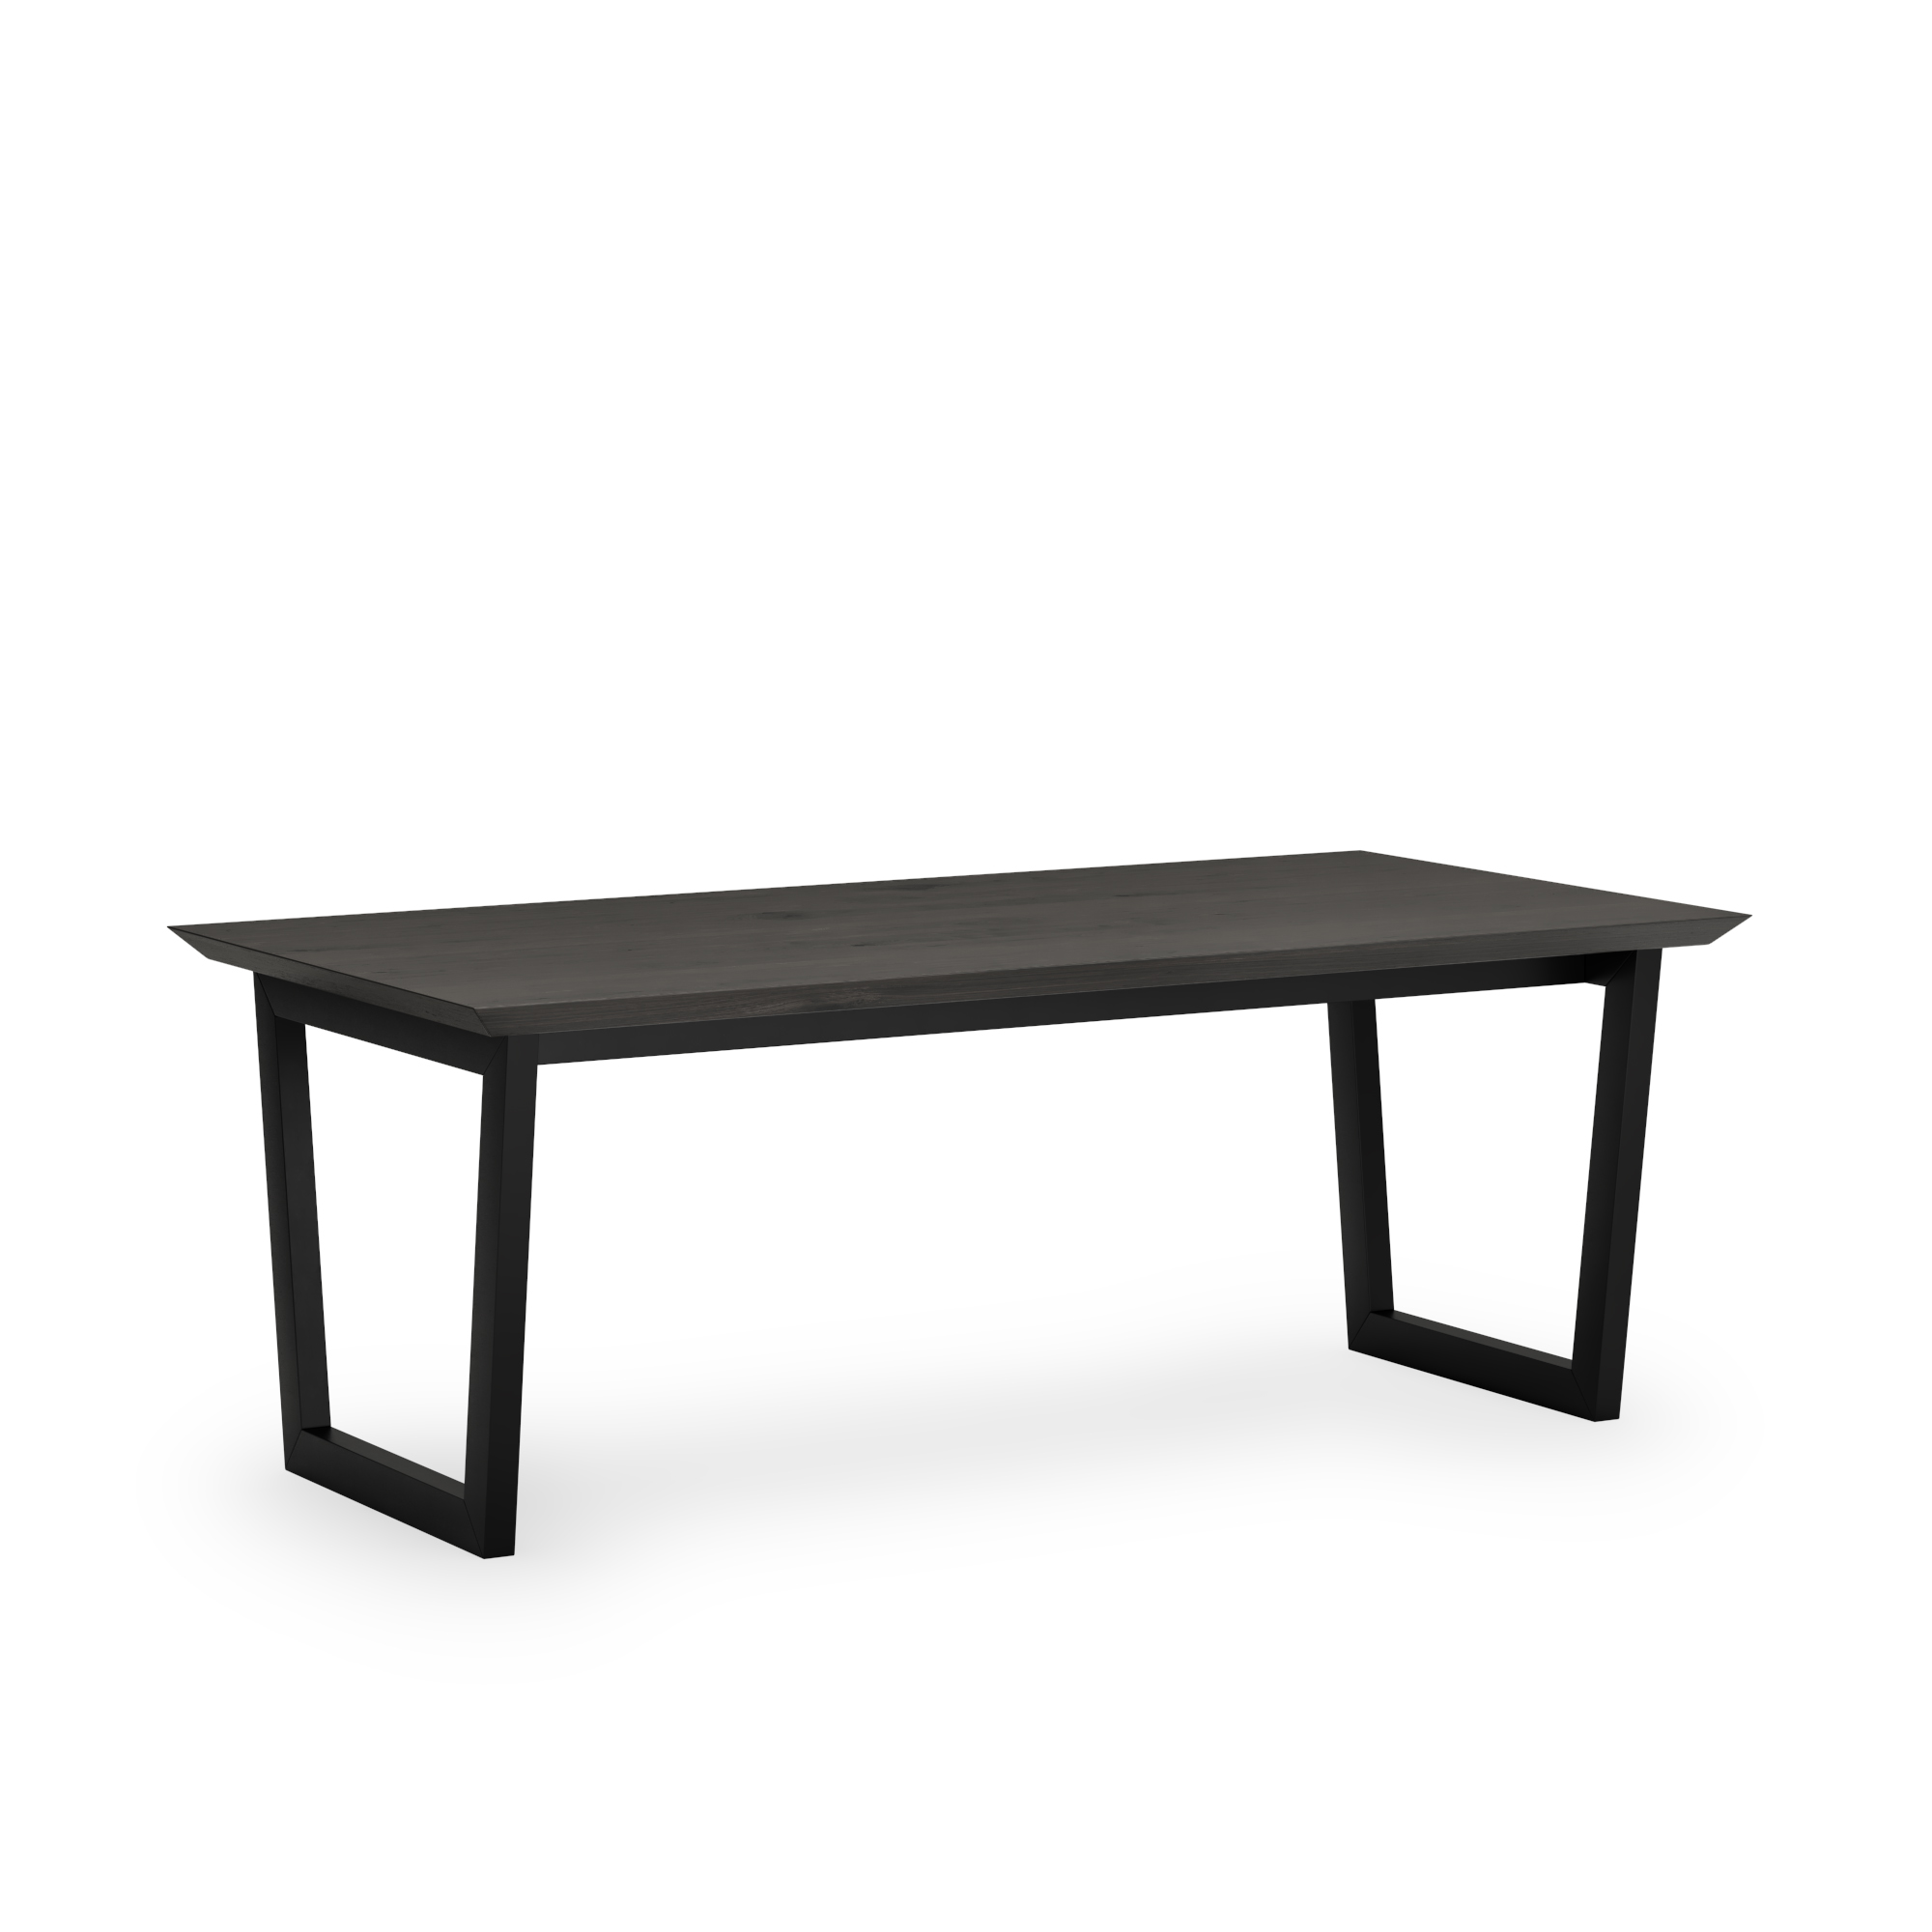 Lumsden Dining Table